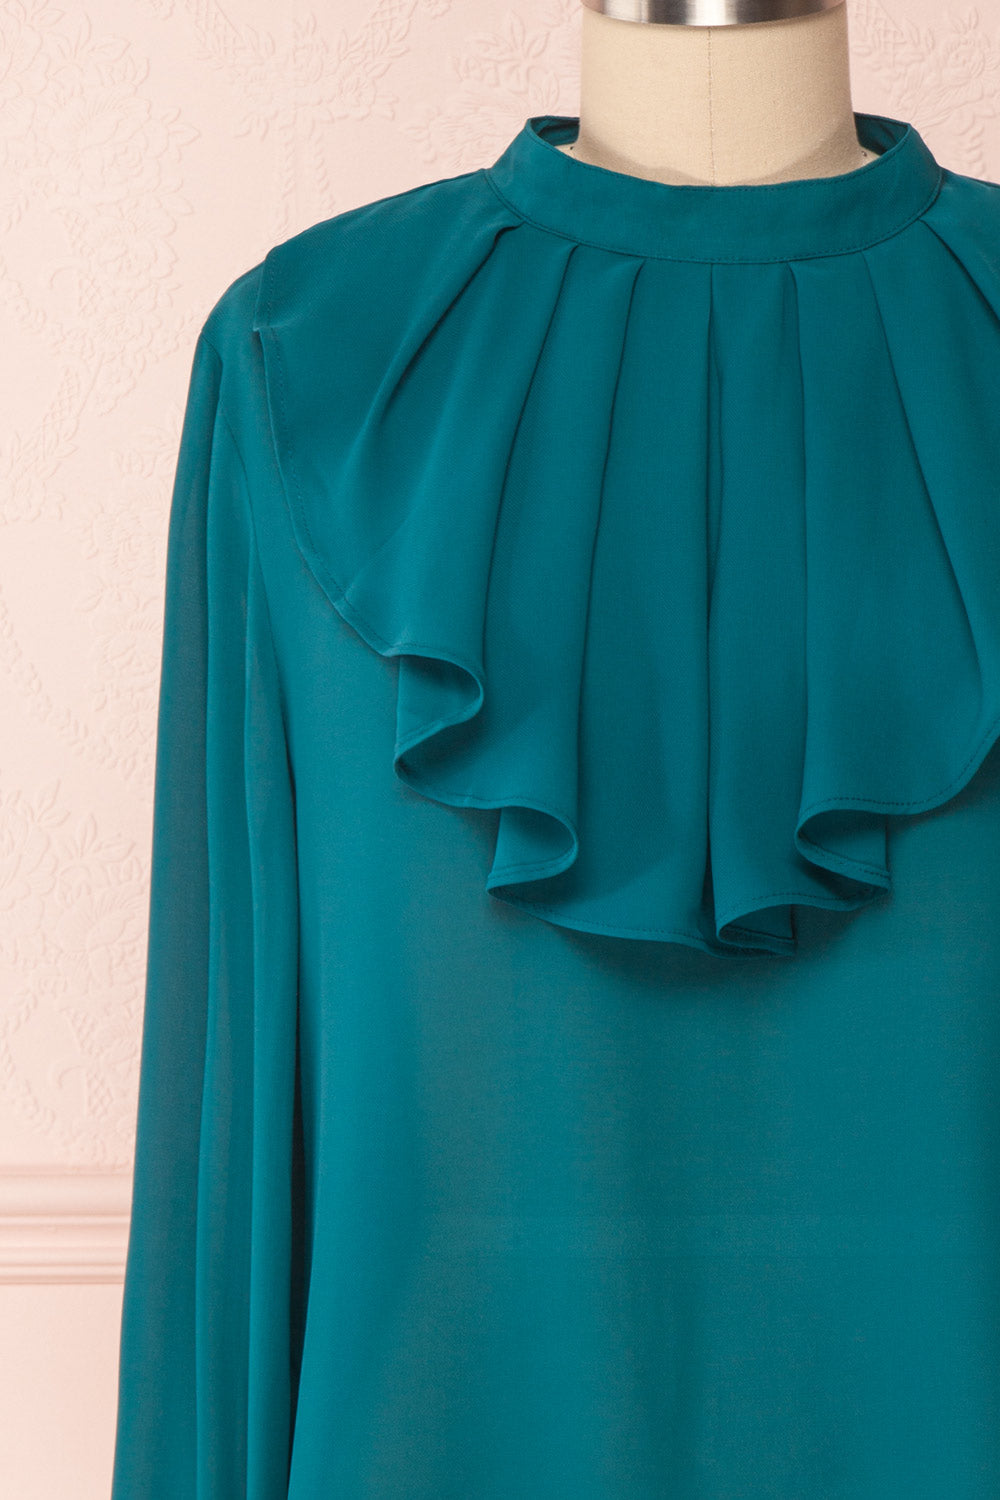 Eliana Emeraude Green Blouse with Ruffles | Boutique 1861 front close-up